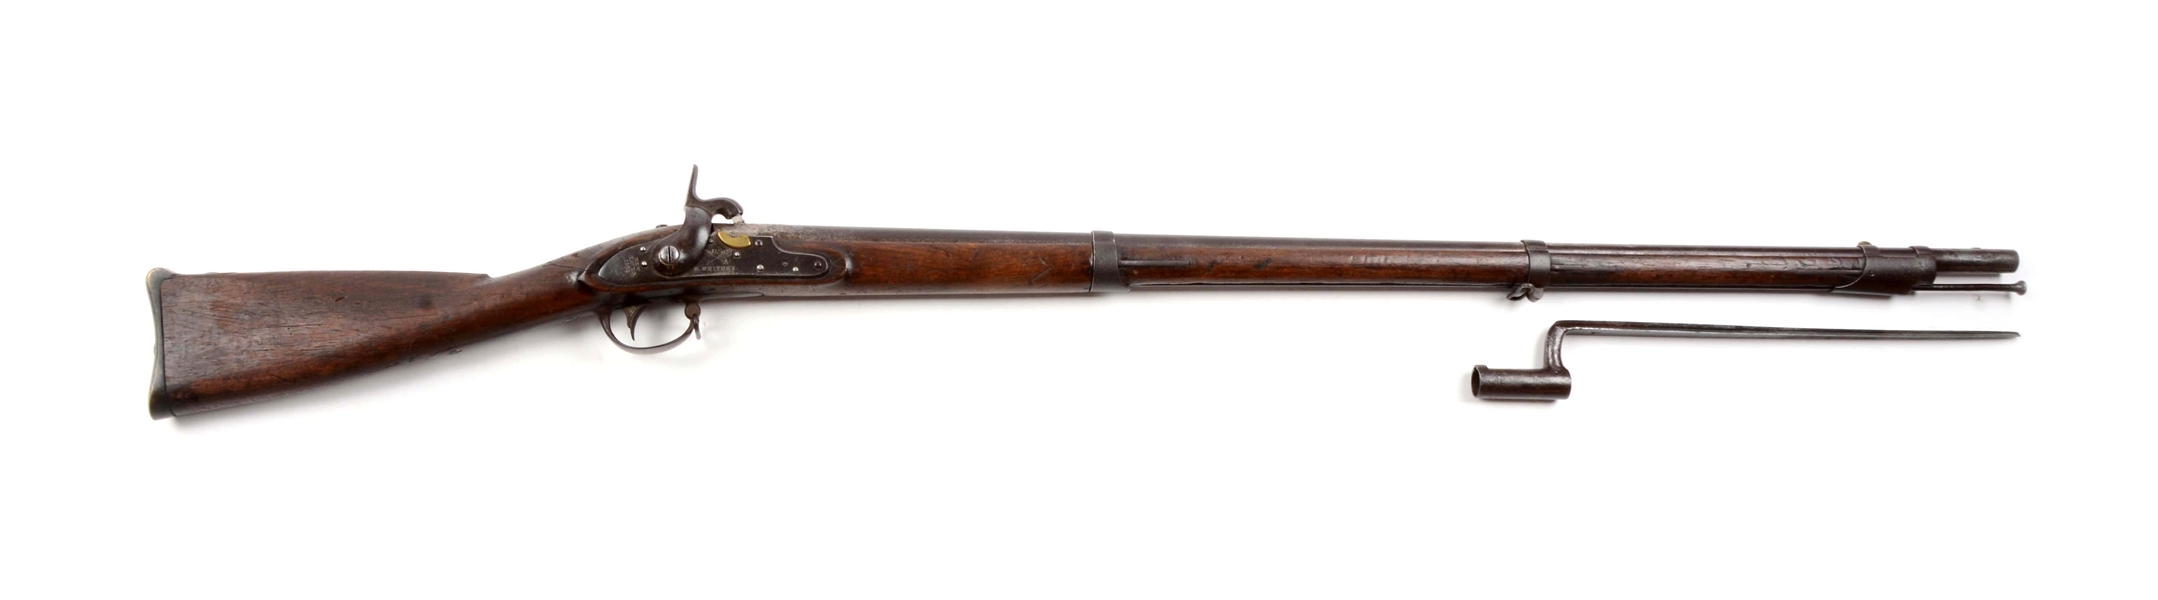 (A) ELY WHITNEY MODEL 1816 MASSACHUSETTS PERCUSSION CONVERSION MUSKET.